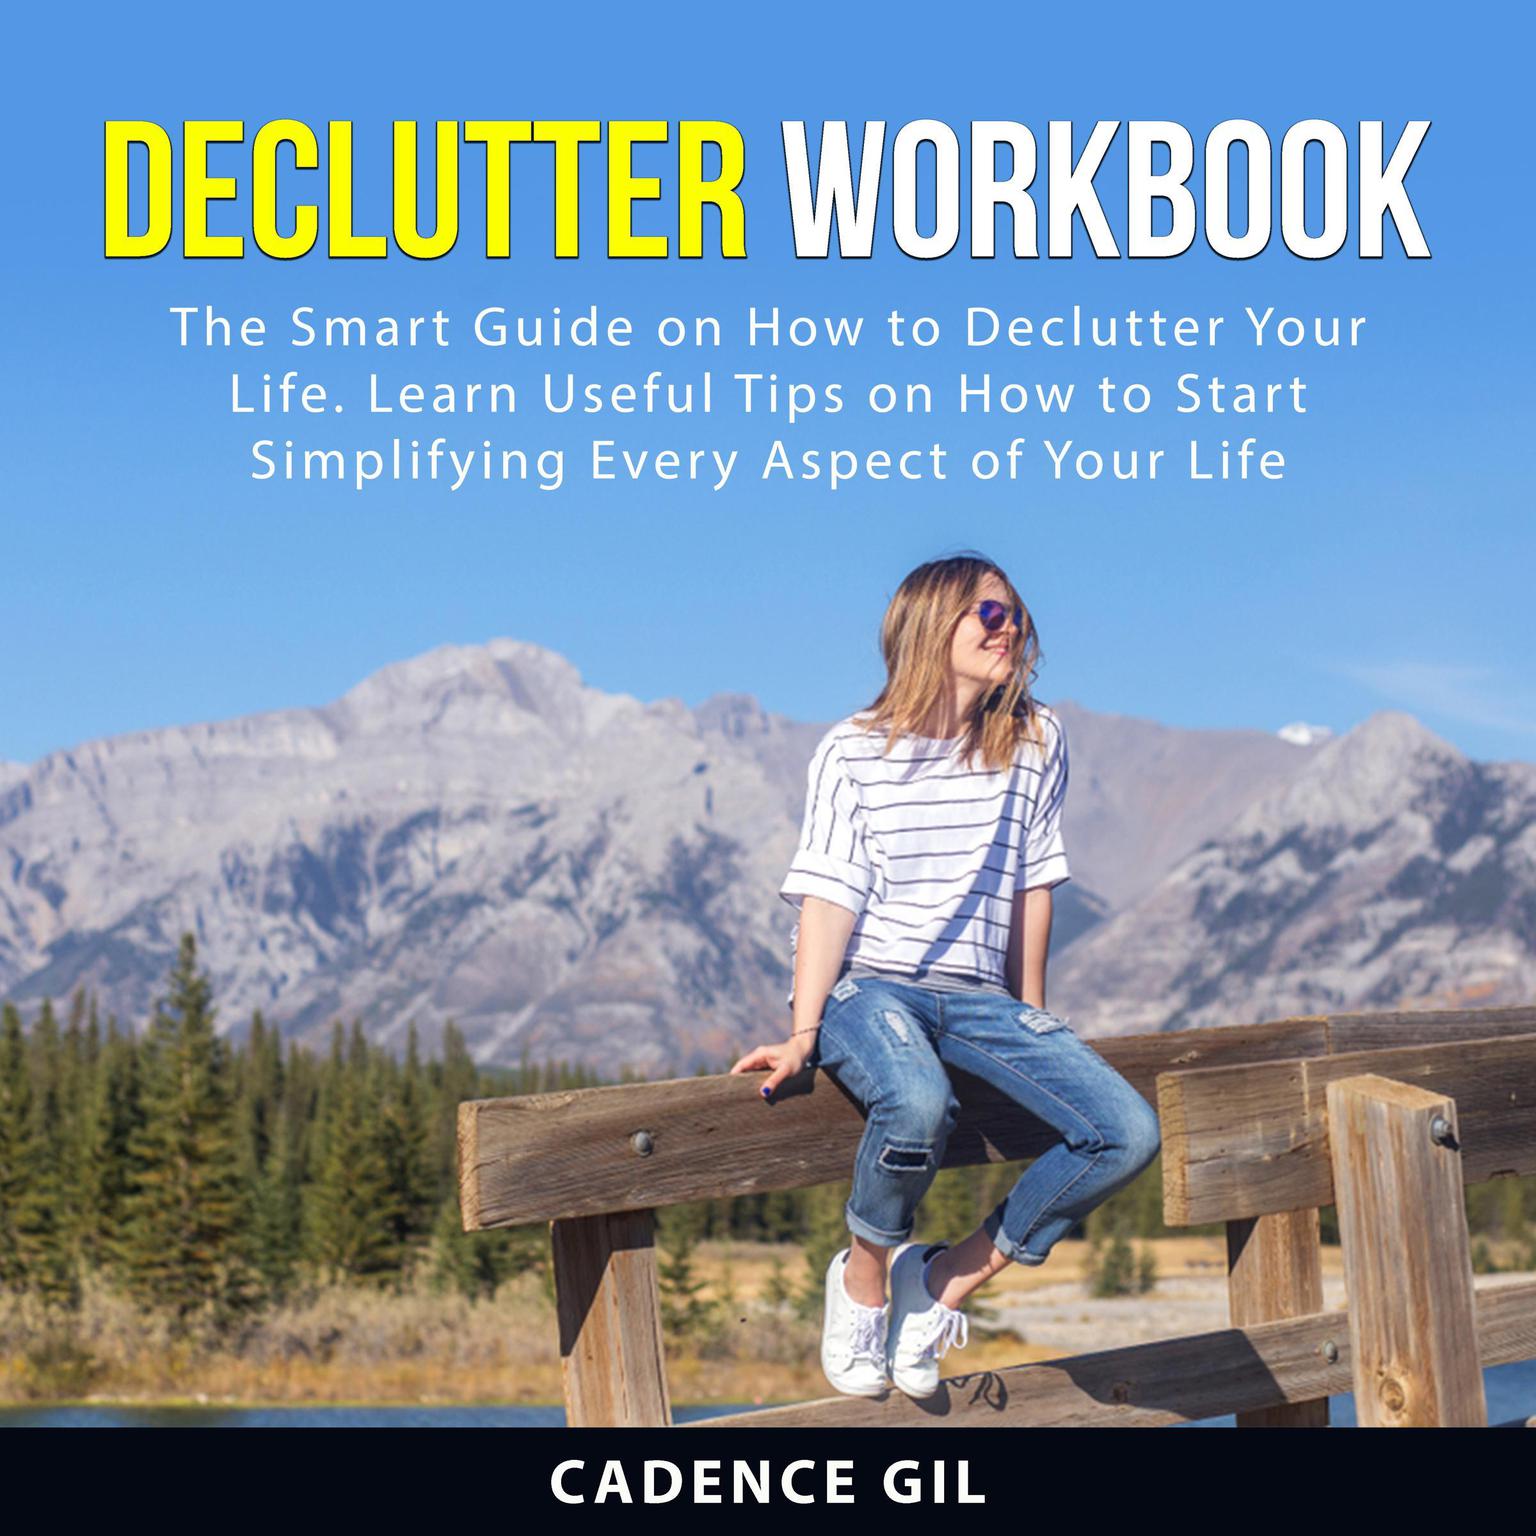 Declutter Workbook: The Smart Guide on How to Declutter Your Life. Learn Useful Tips on How to Start Simplifying Every Aspect of Your Life Audiobook, by Cadence Gil